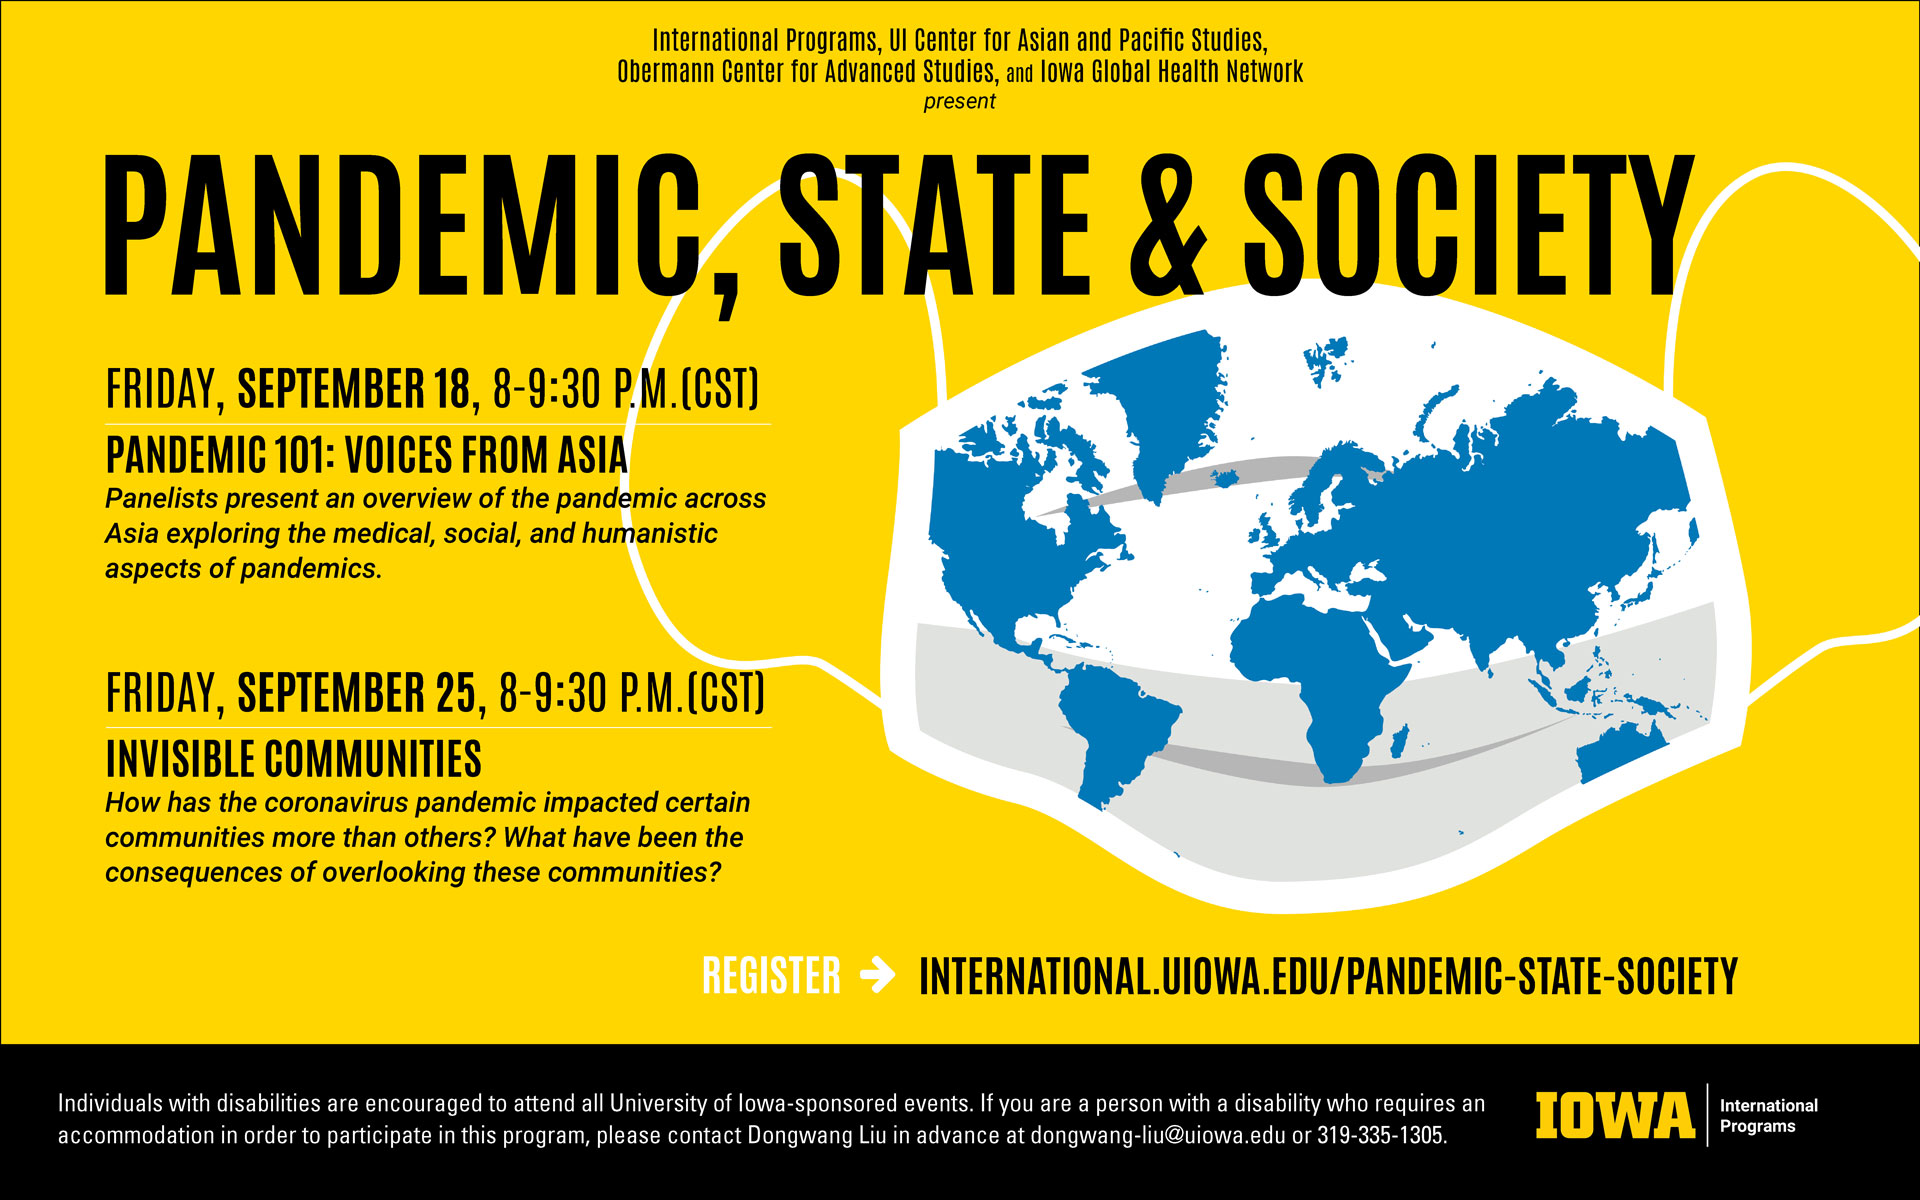 International Programs presents pandemic, state and society the series. The First event is on Friday September 18th from 8 to 9:30pm CST and is on Pandemic 101: Voices from Asia. The second event is on Friday September 25th from 8 to 9:30pm CST and is on Invisible Communities. Register for the events at international.uiowa.edu/pandemic-state-society